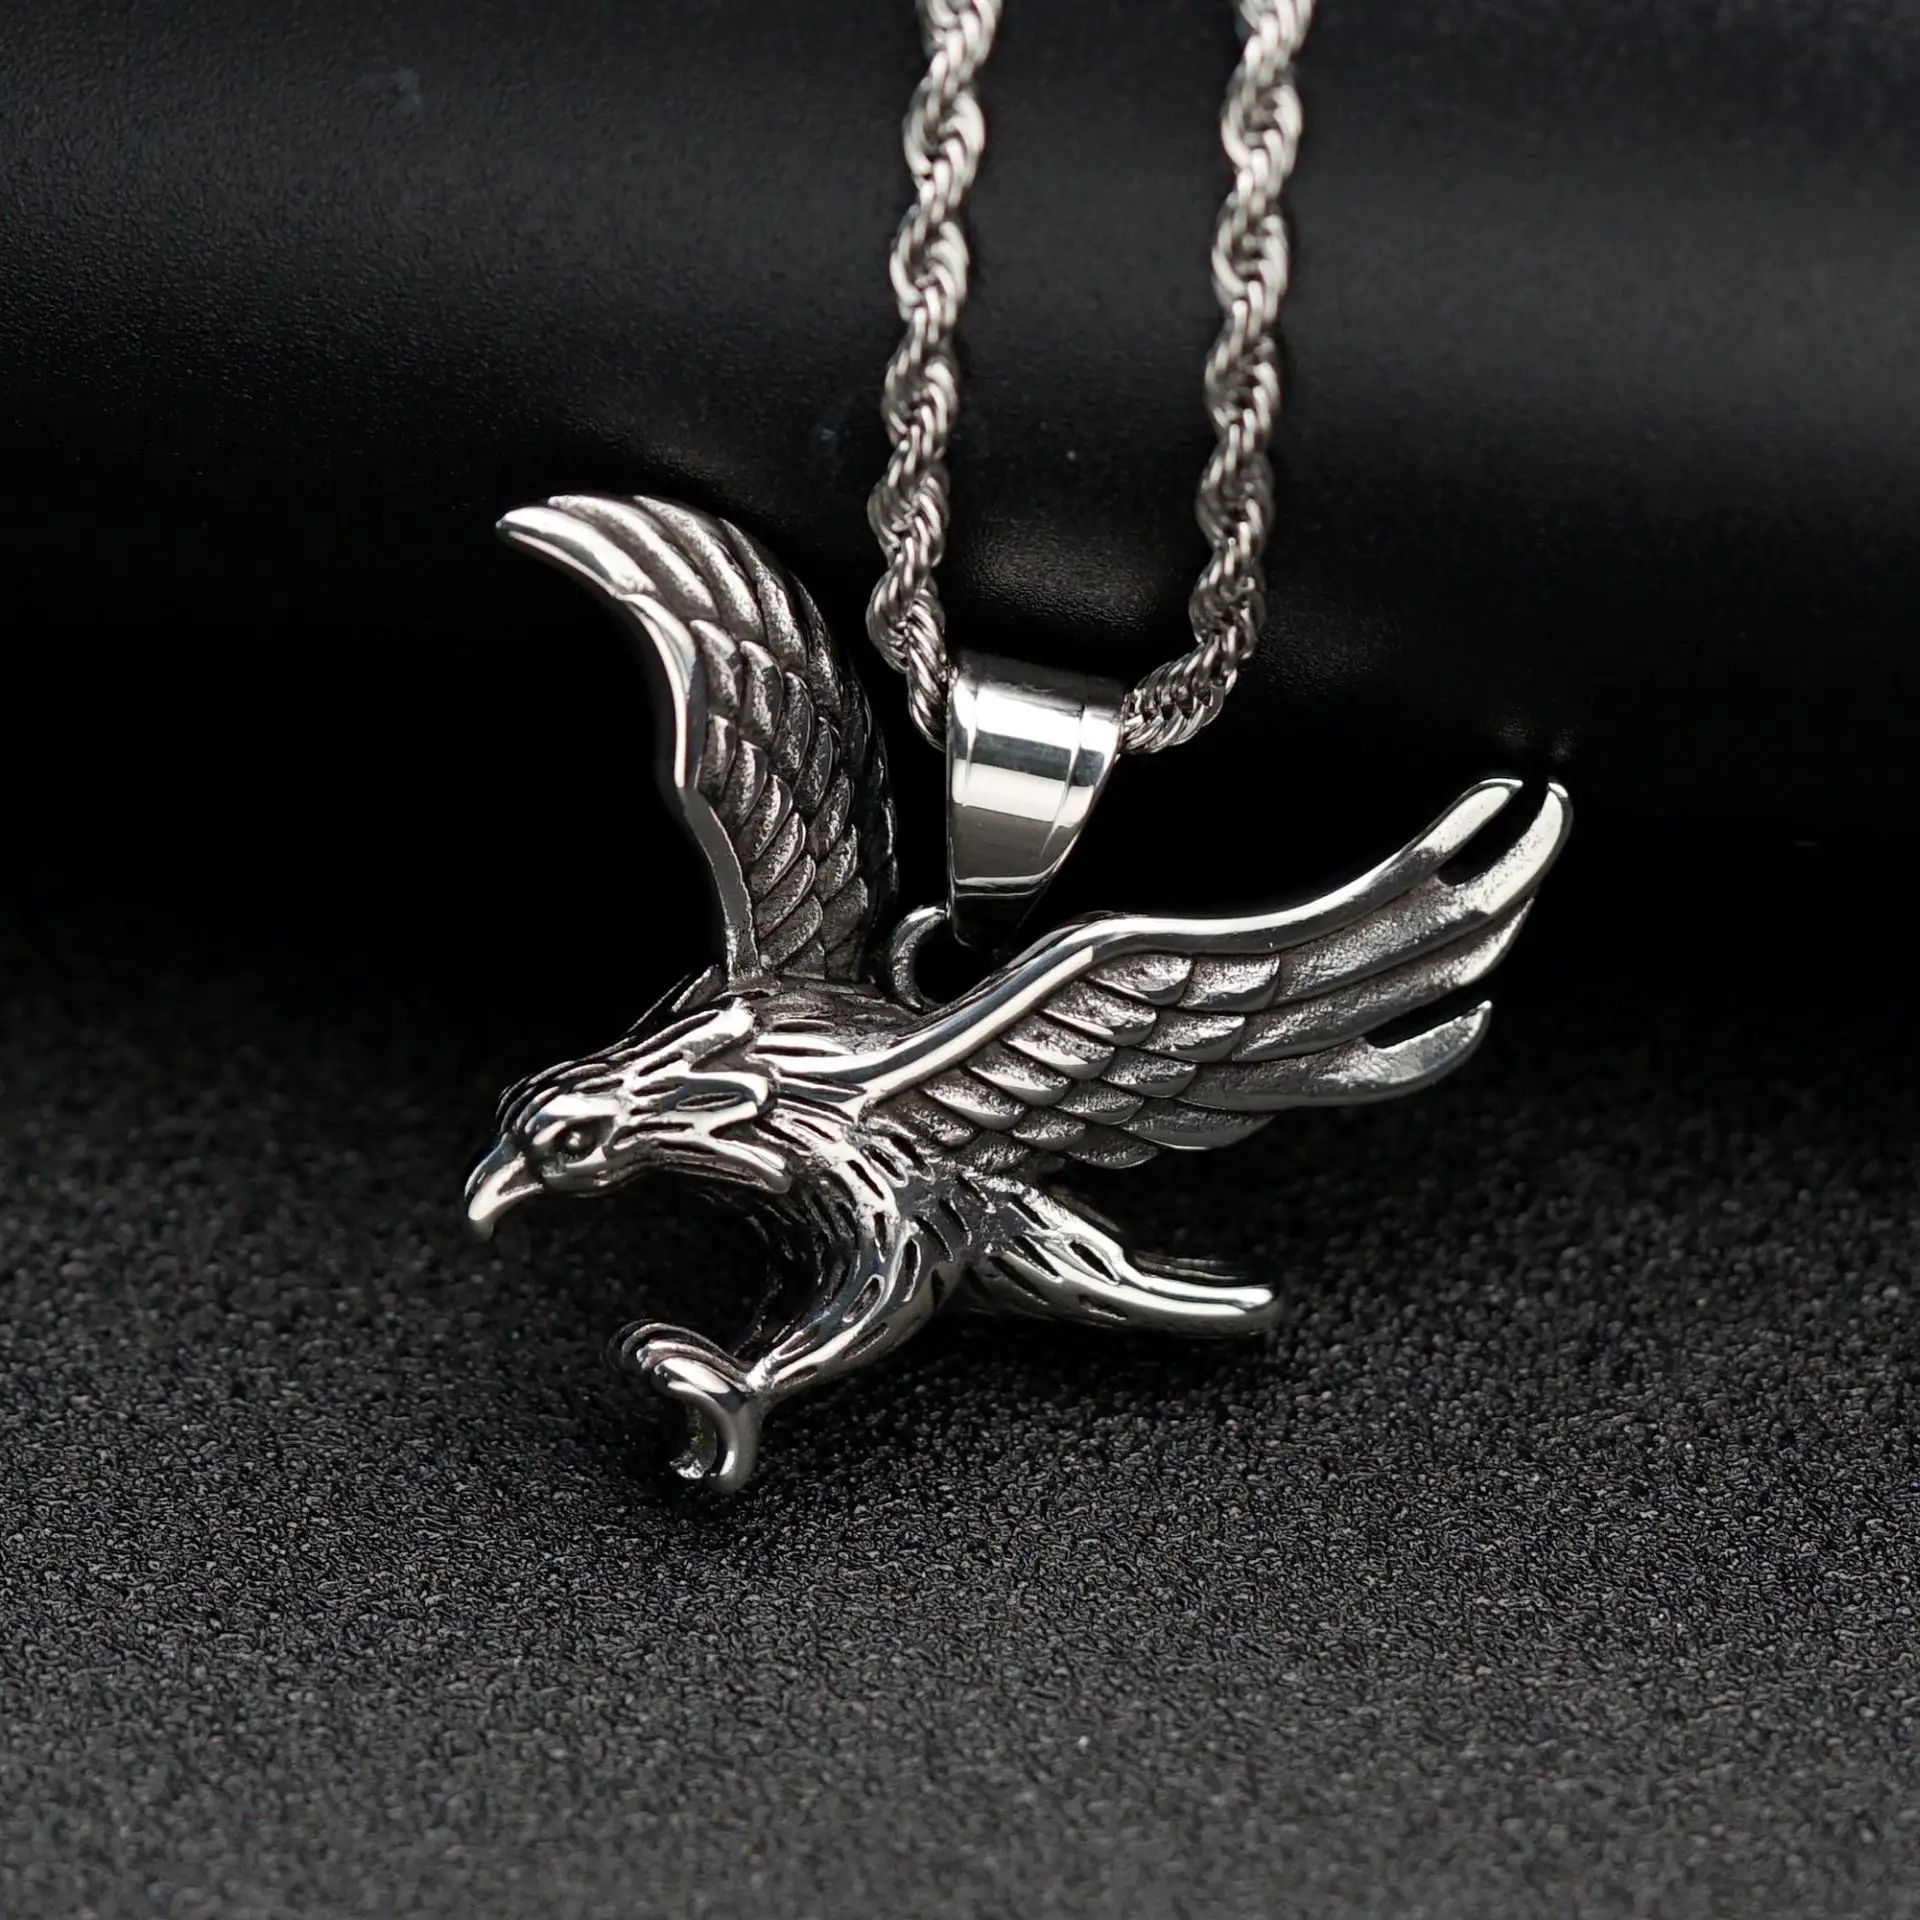 Classic Rock Punk Viking Gothic Men's Stainless Steel Eagle Pendant Necklace